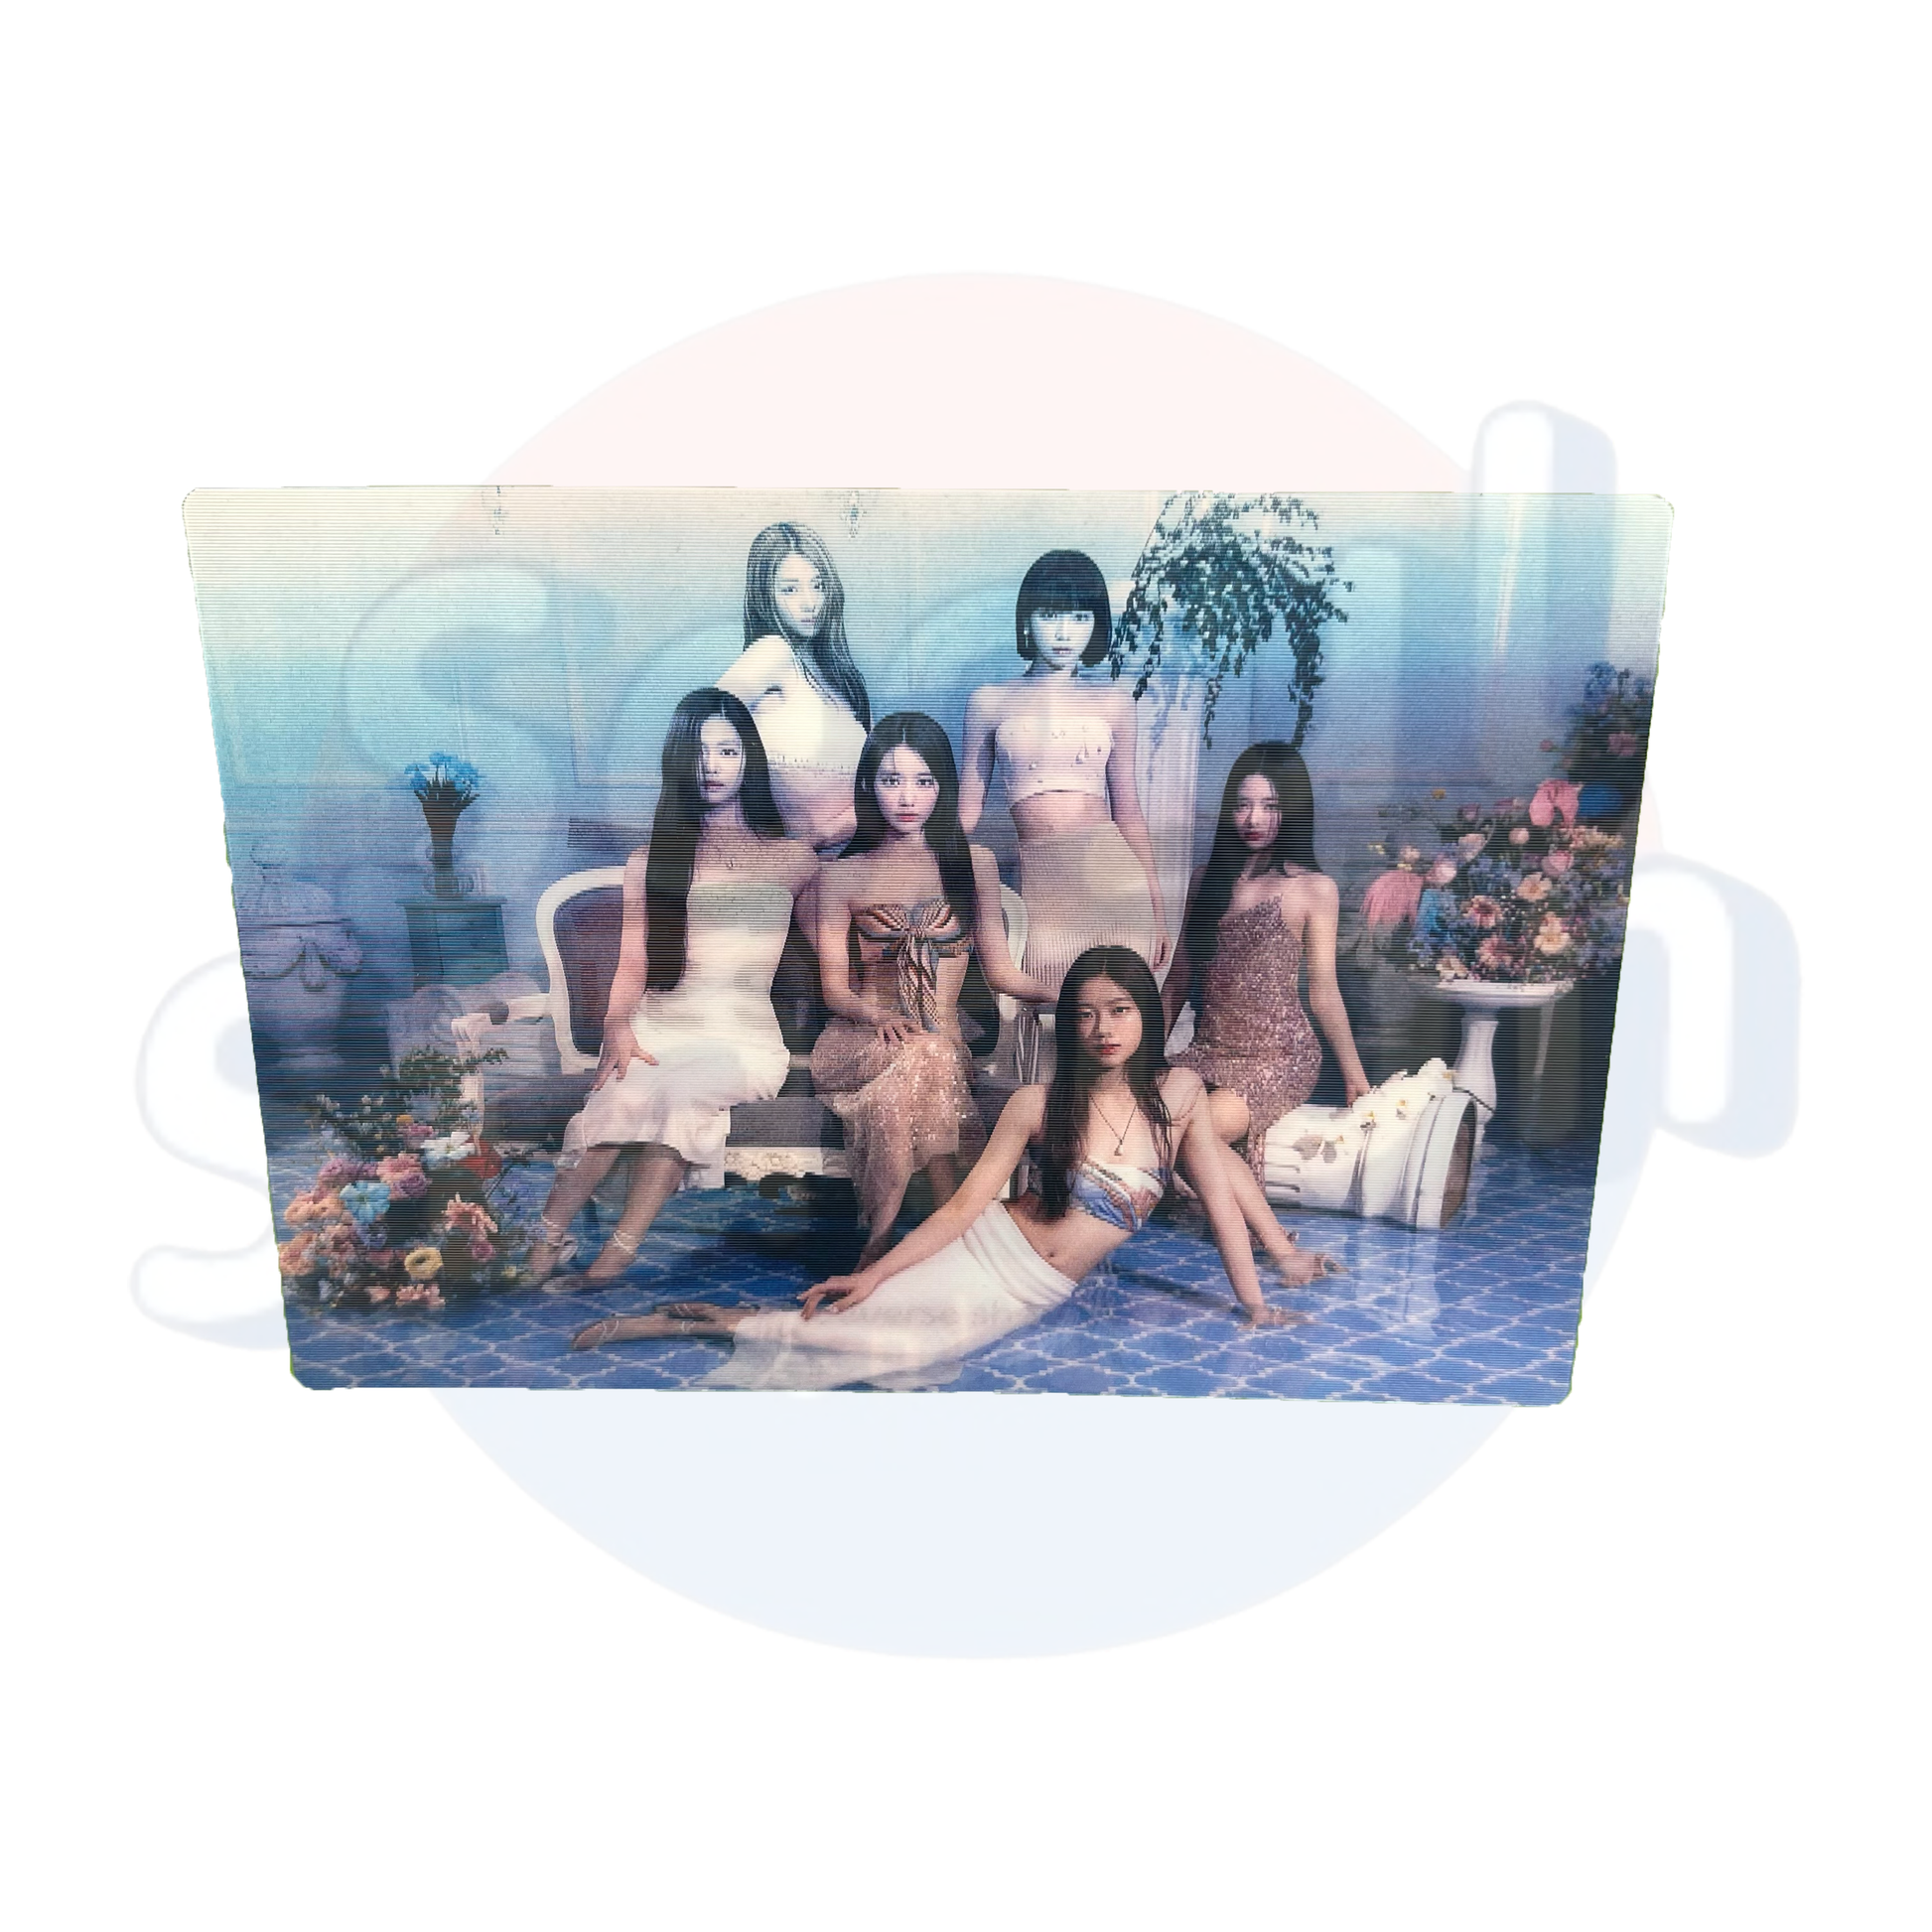 LE SSERAFIM - FEARLESS - WEVERSE Lenticular Post Card Sitting on chairs